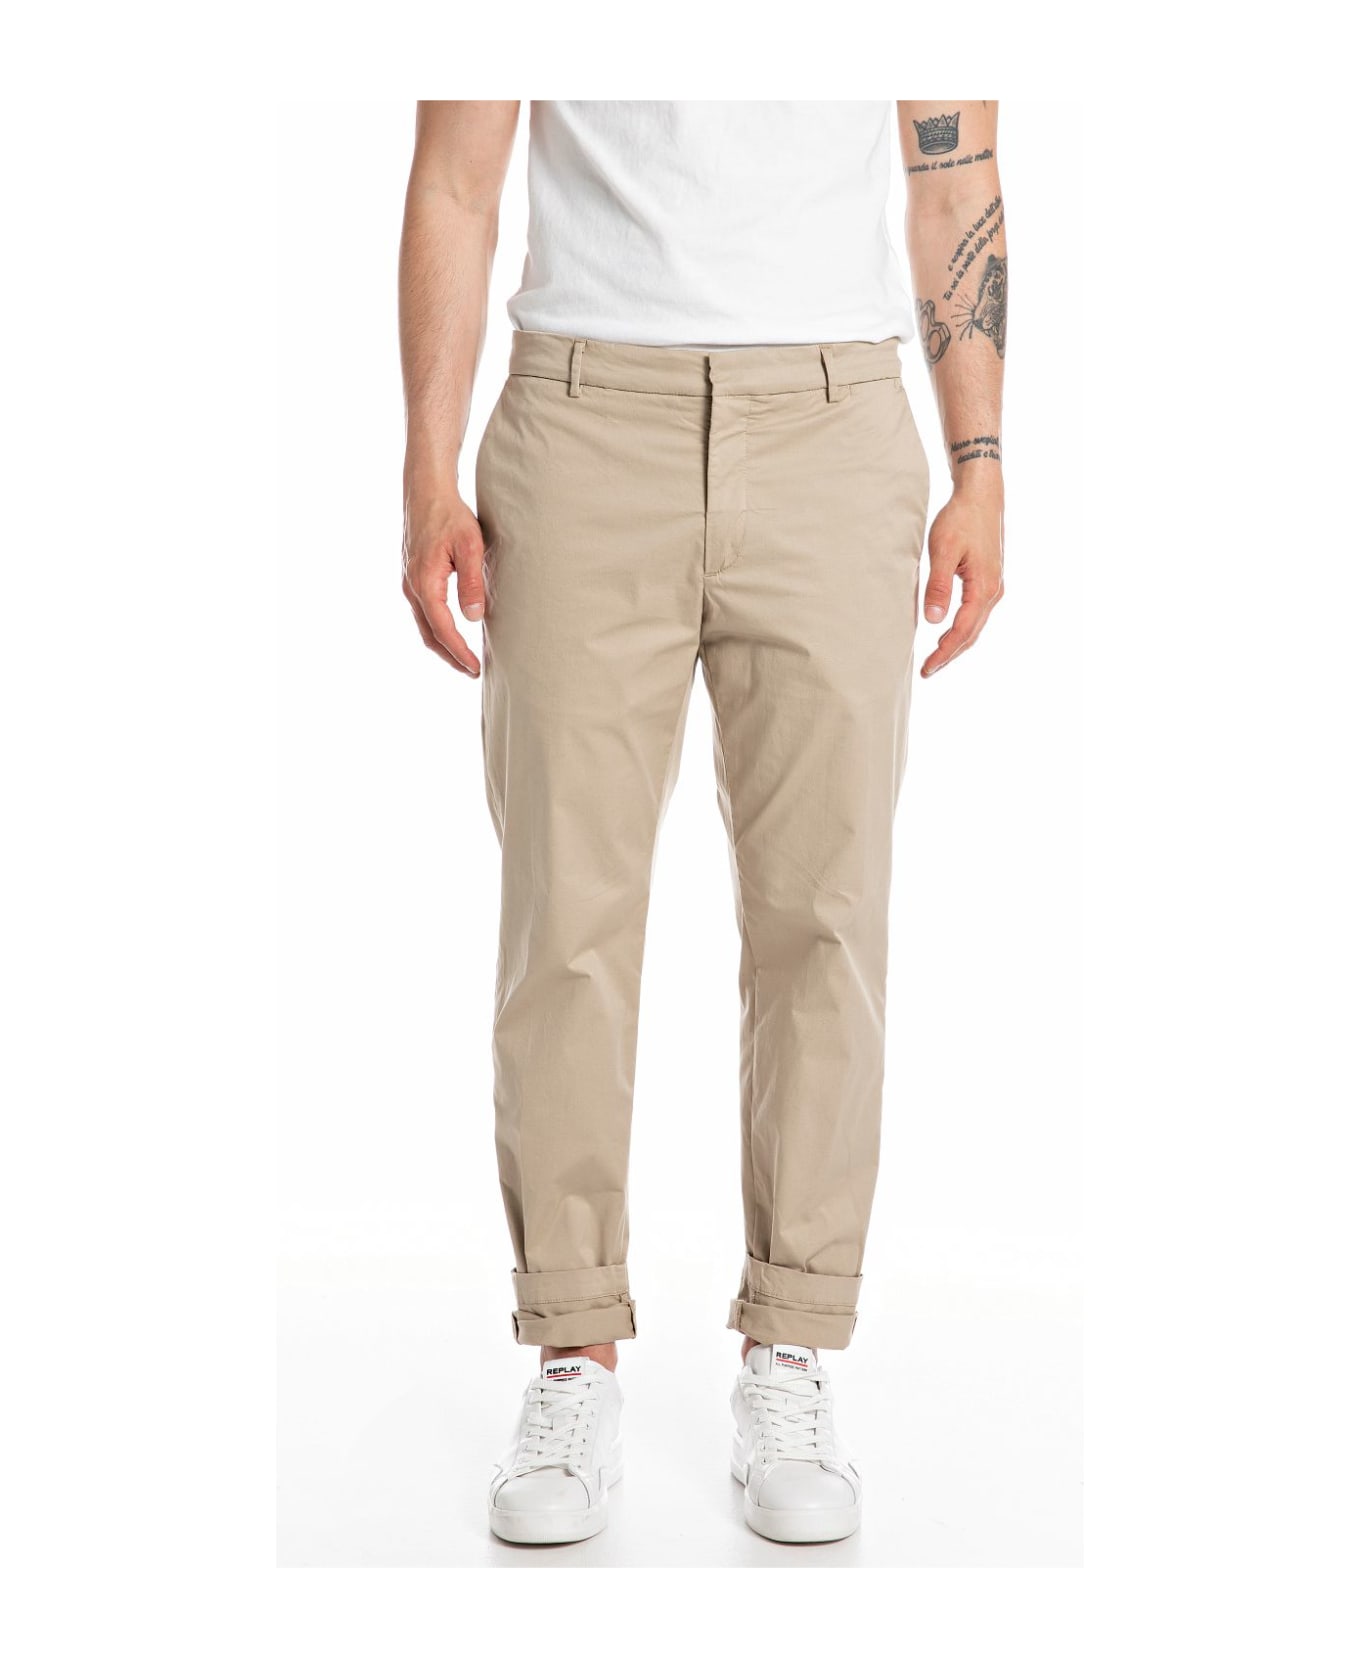 Replay Trousers - Beige